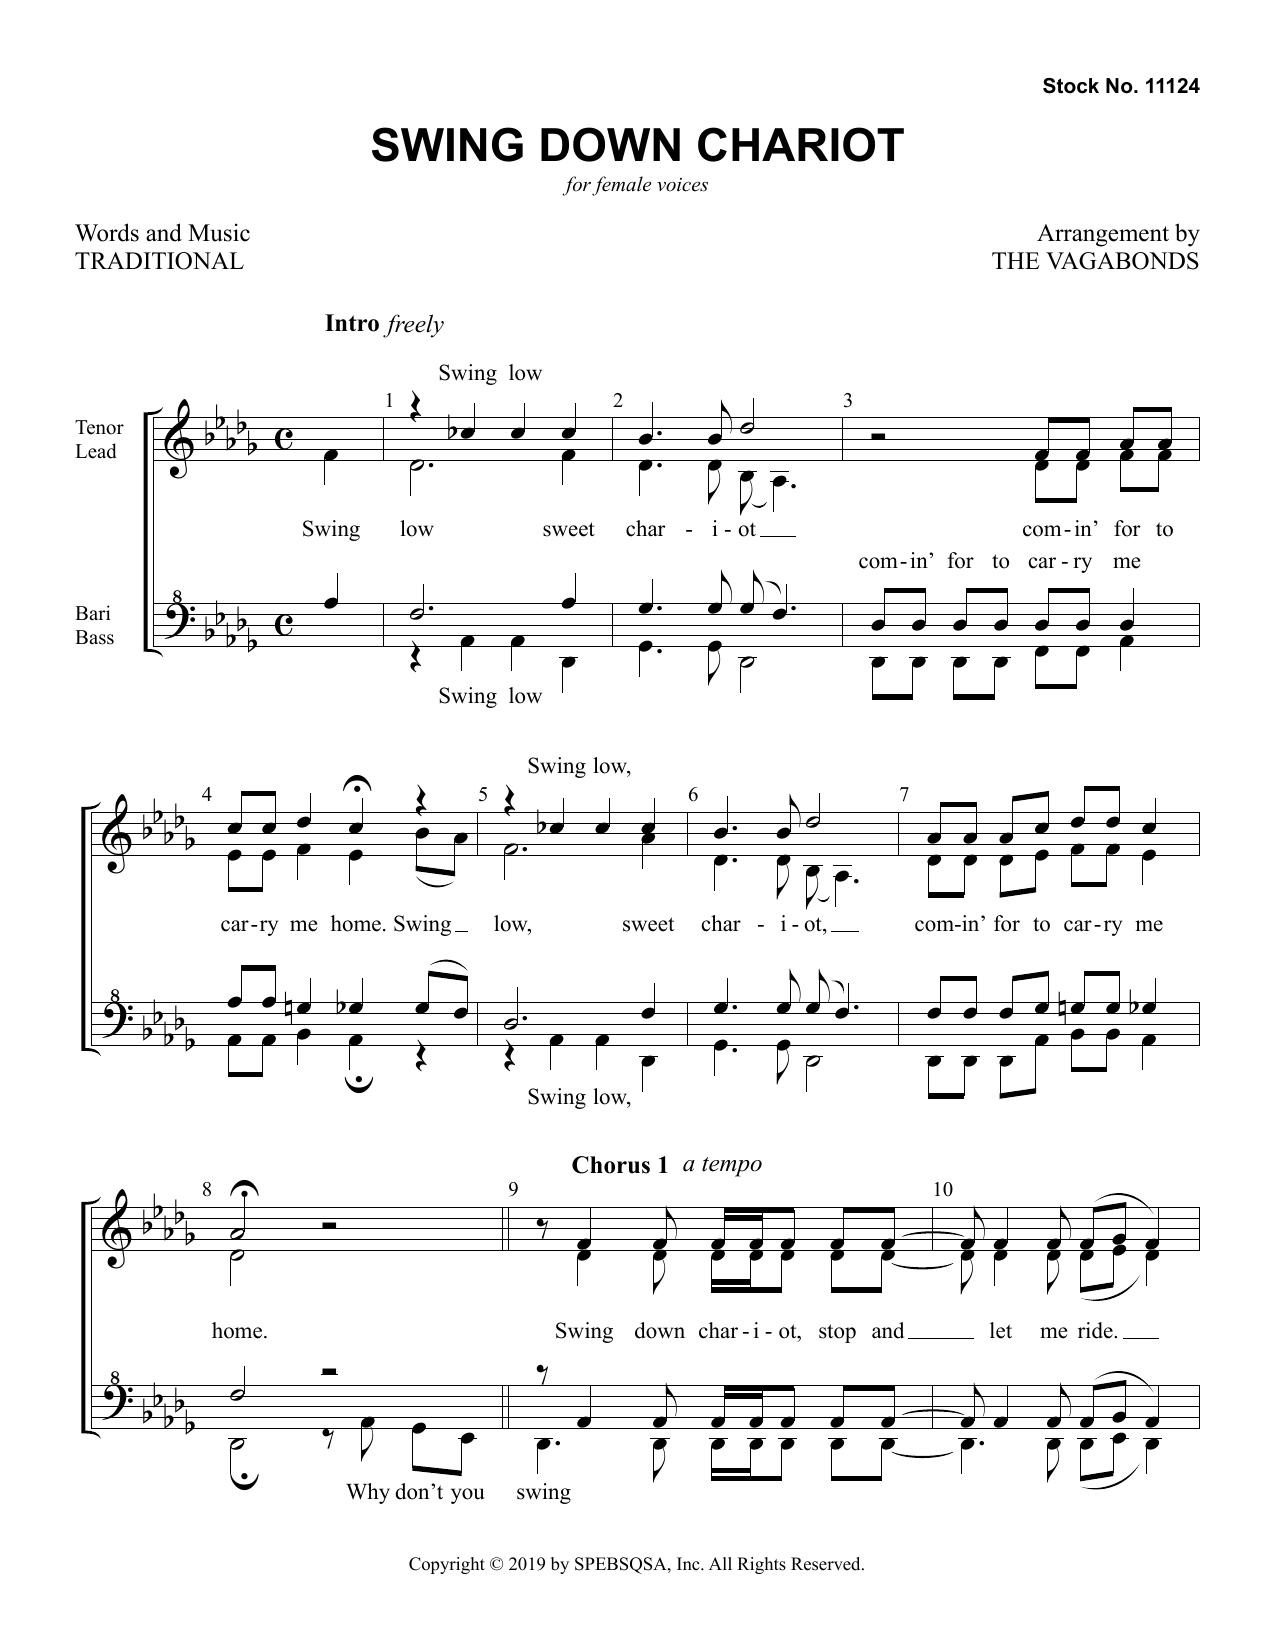 Download The Vagabonds Swing Down Chariot Sheet Music